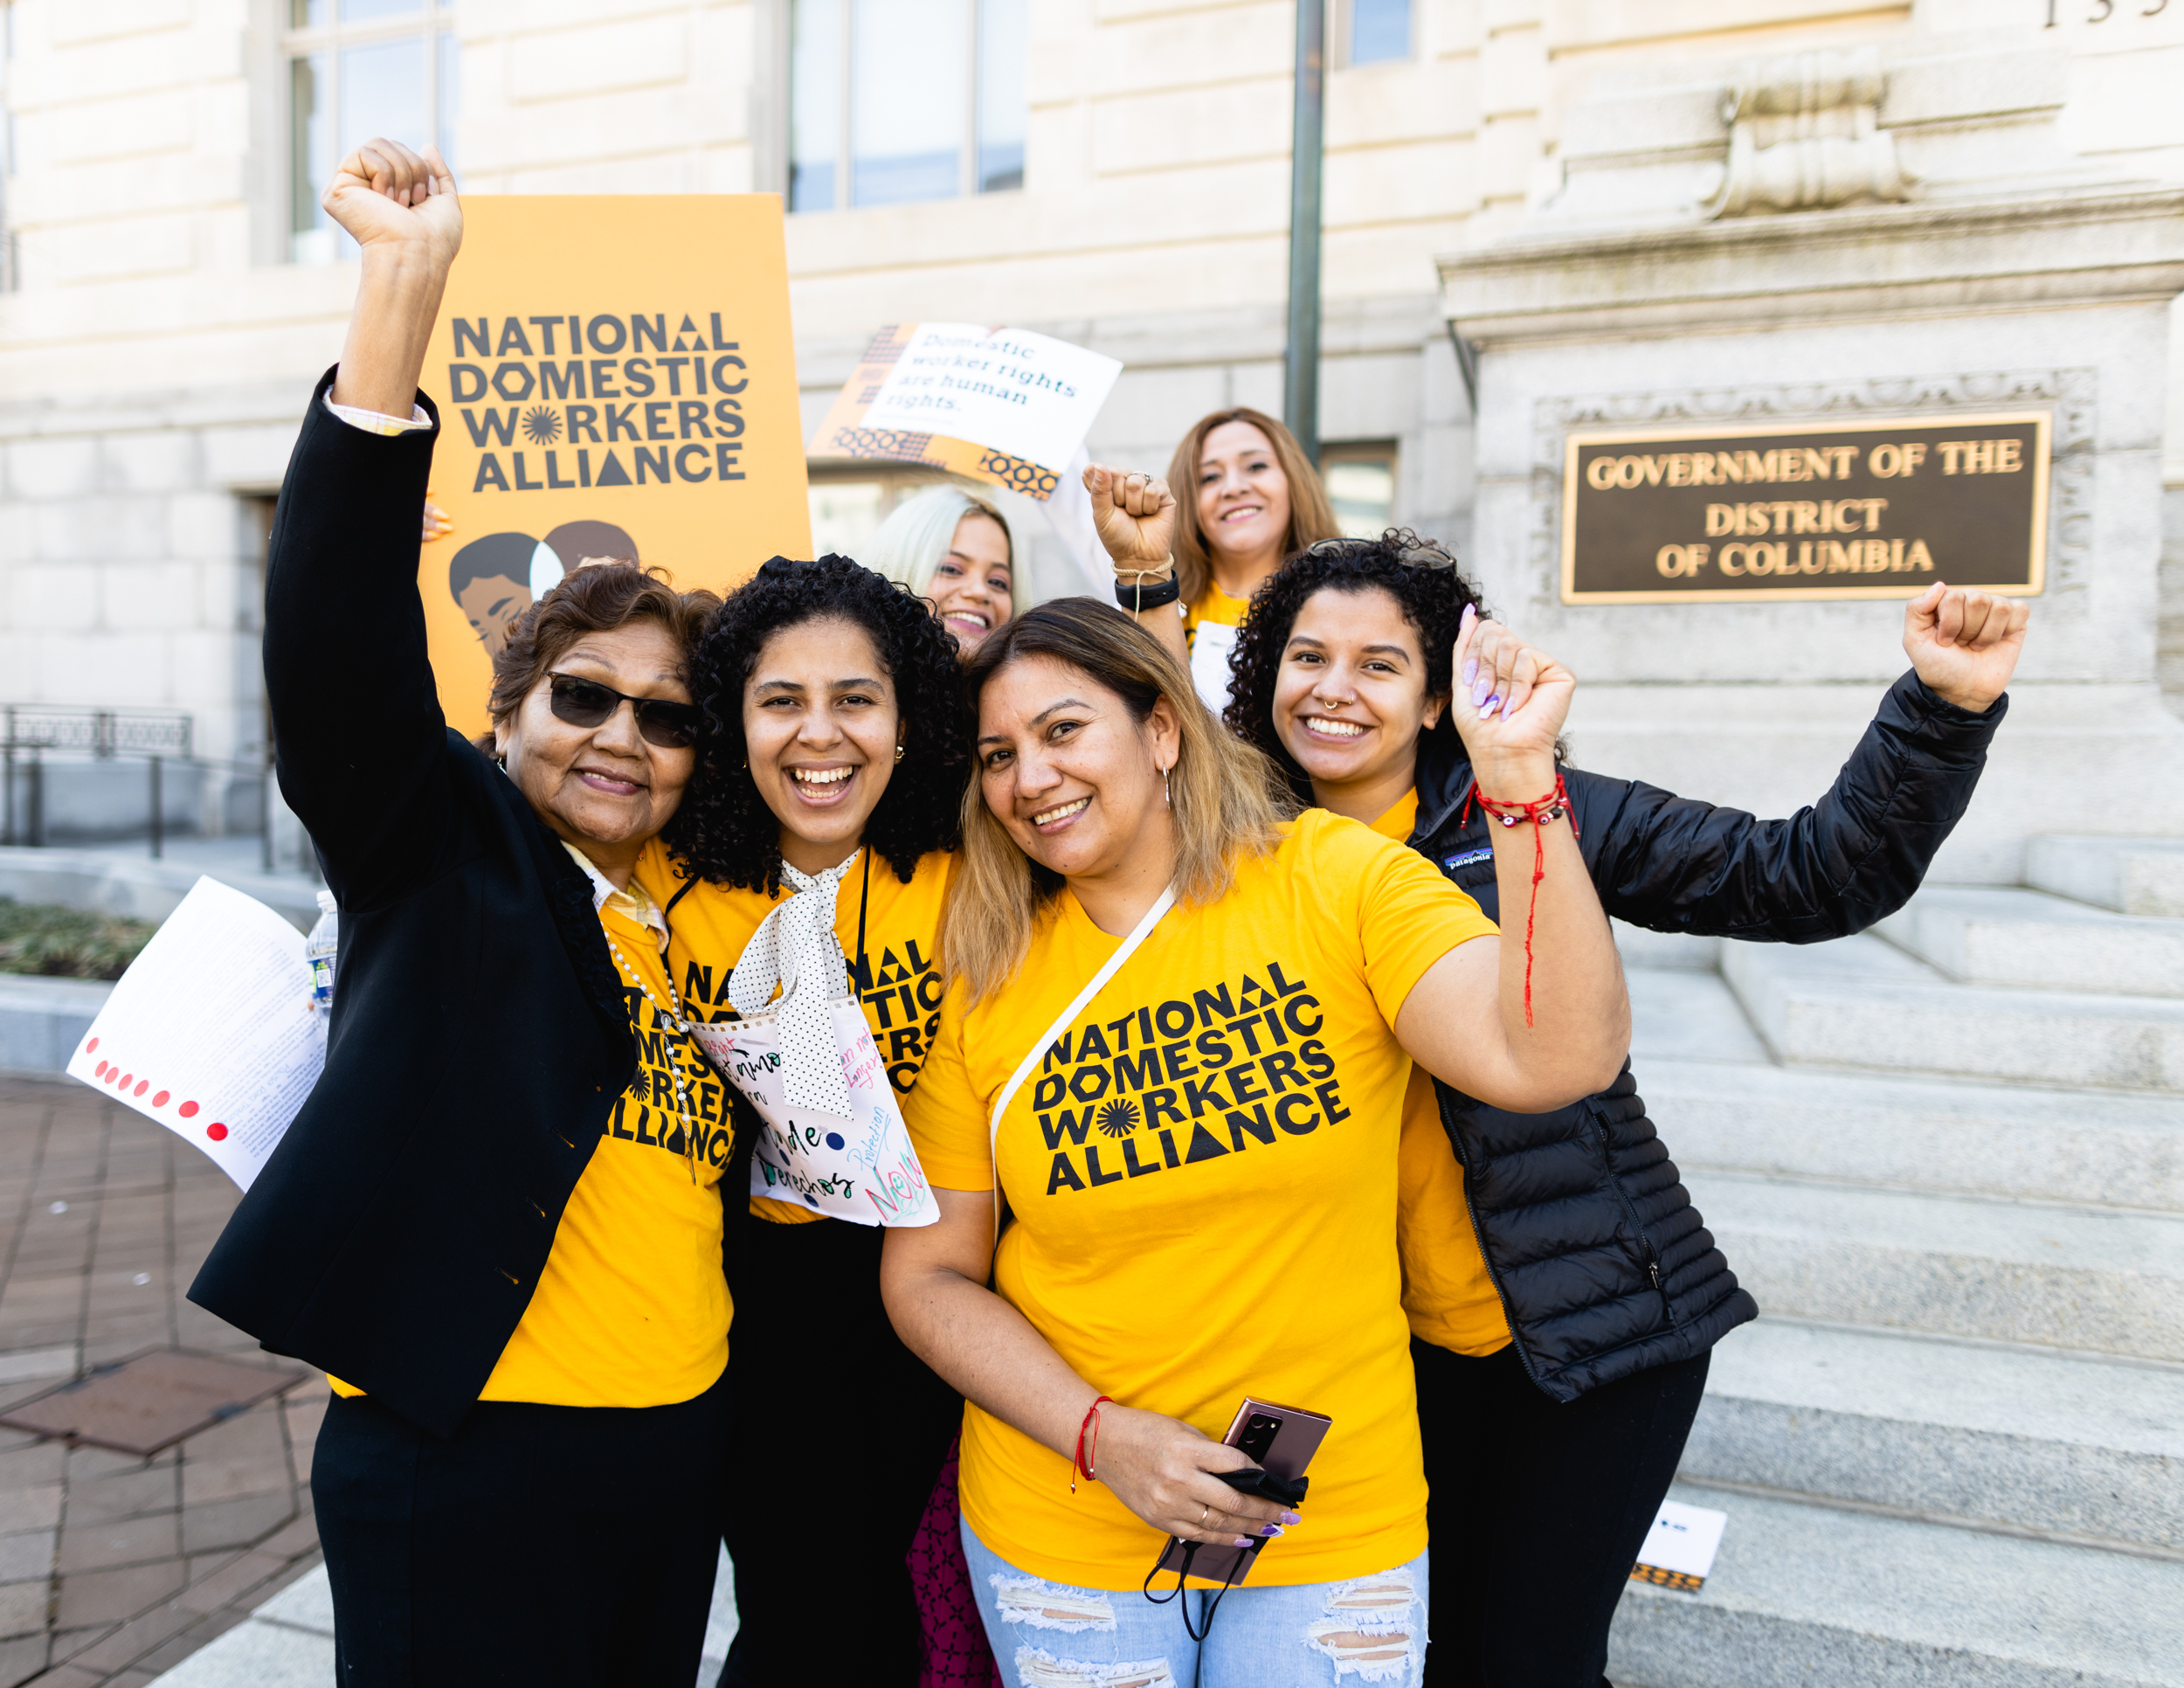 Member of the Domestic Workers Alliance wearing their yellow shirts, posing for a picture with fists raised in the hair. There is a sign in the background showing support of the Domestic Workers Bill of Rights.